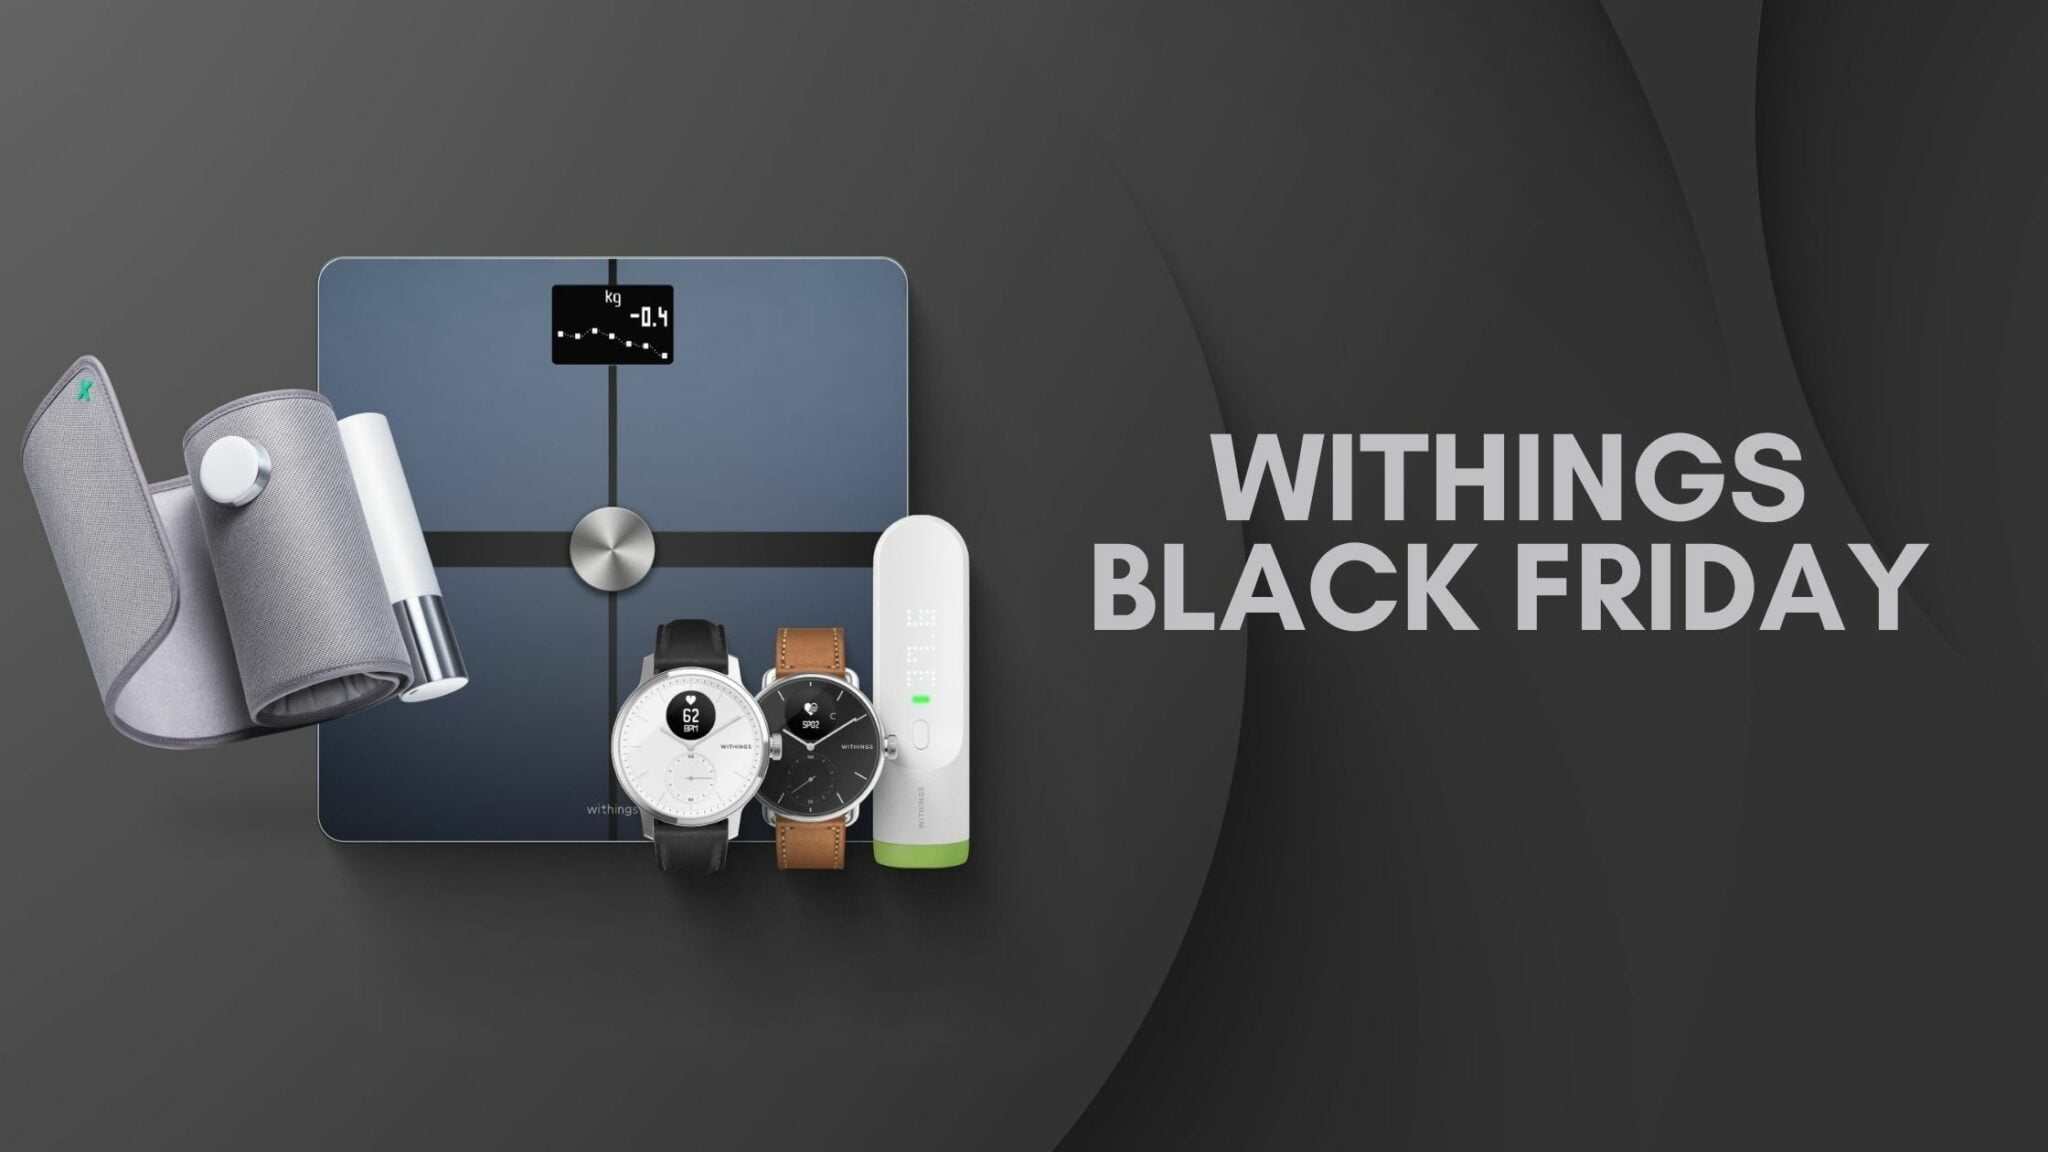 Withings Black Friday Deals on Amazon The best smart scales go cheaper